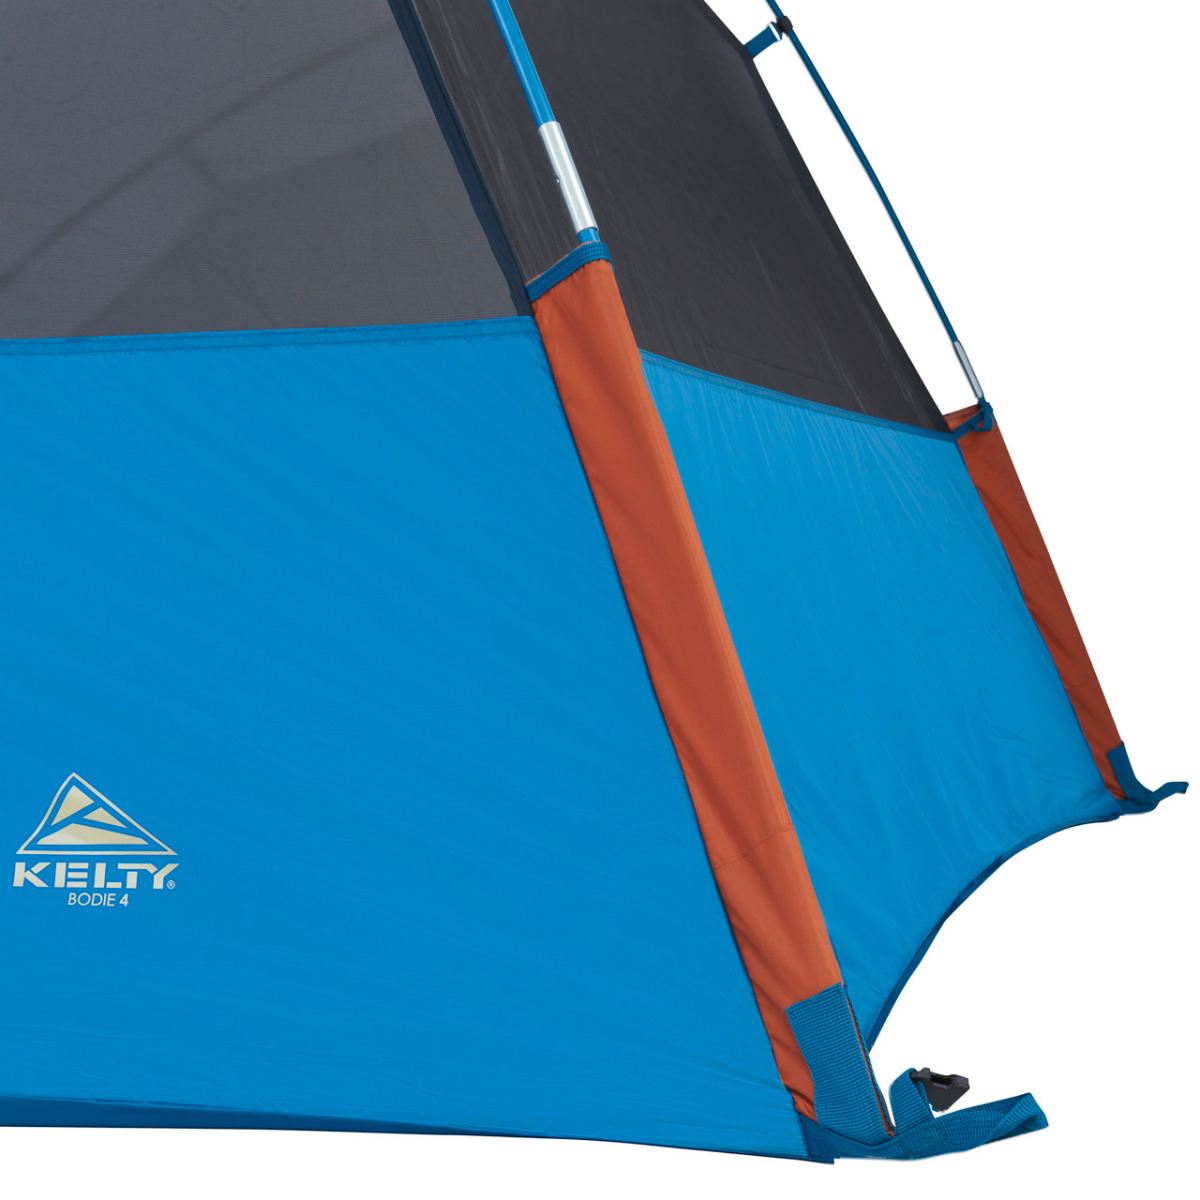 KELTY | BODIE 4 - Click Image to Close